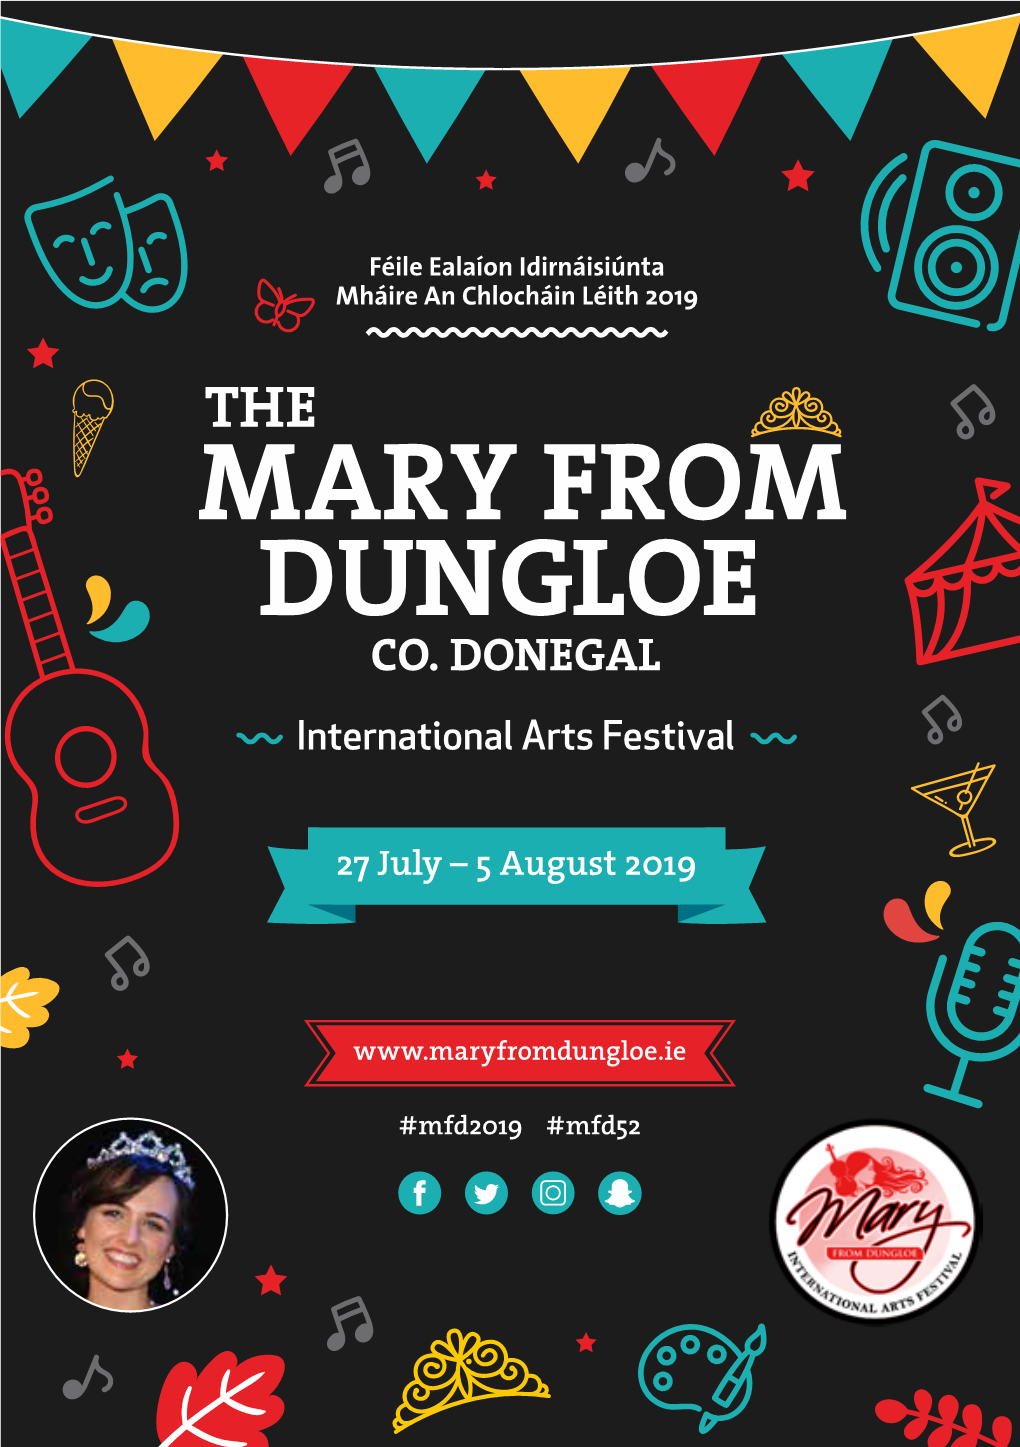 Mary from Dungloe the Co. Donegal